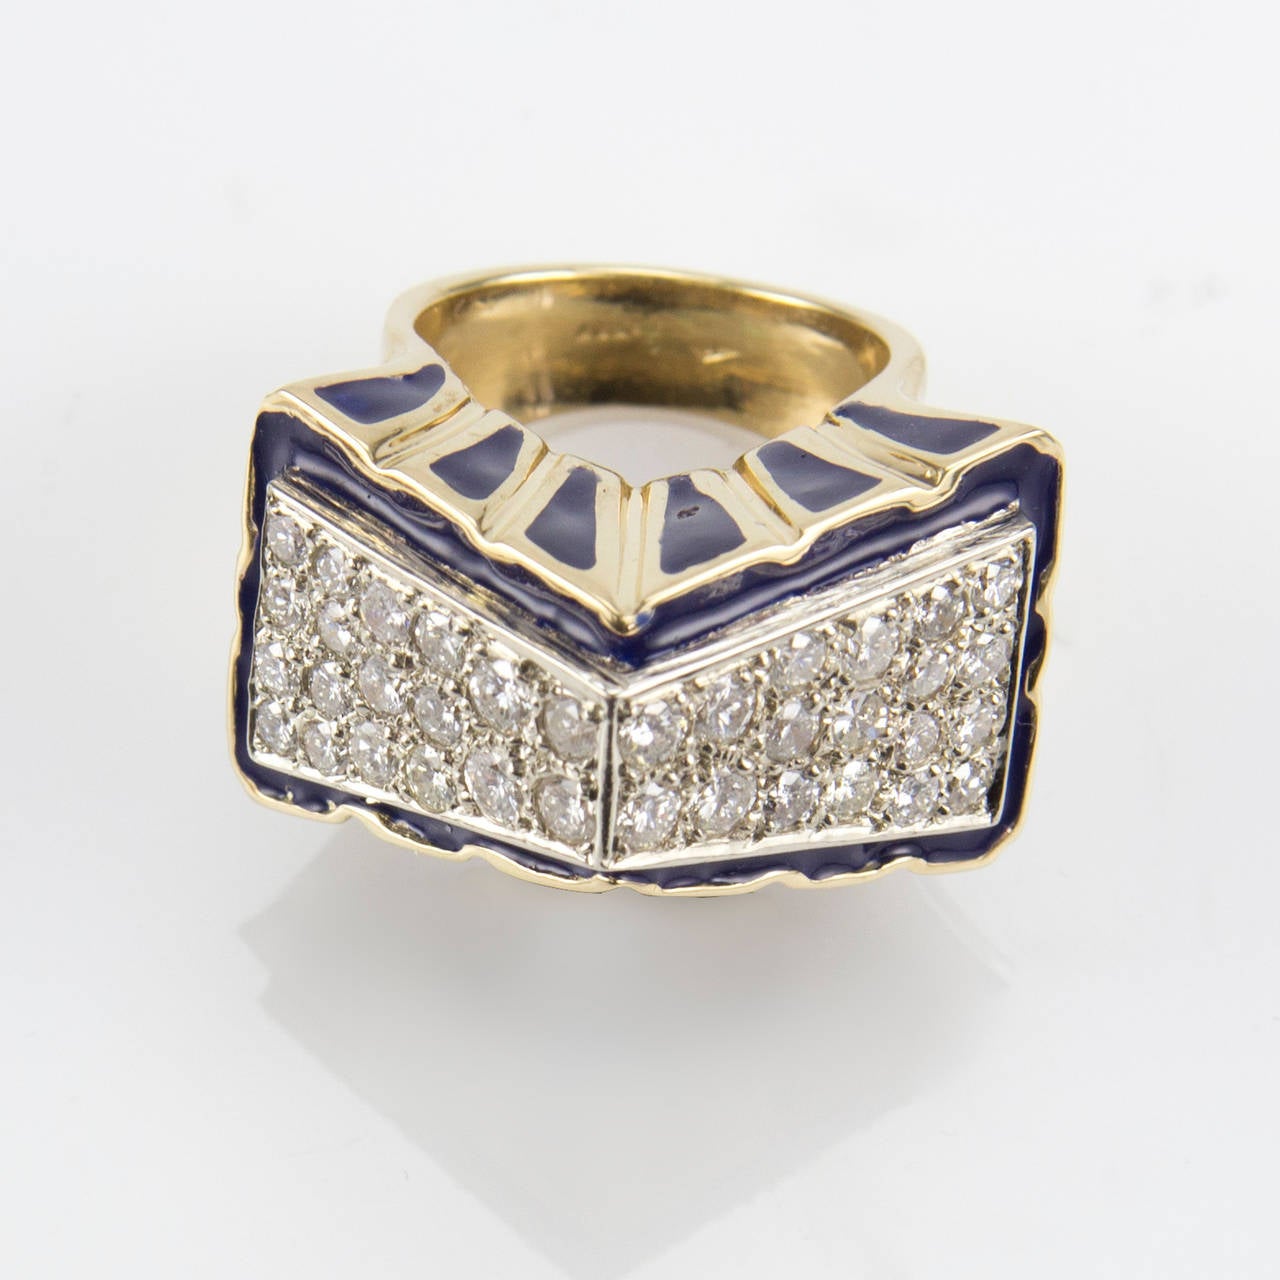 Magnificent Diamond and Blue Enamel Gable Cocktail Ring, Beautifully hand crafted in 18 Karat yellow Gold. Set with 36 diamonds x 0.08ct each; approx. 2.88 total carat weight. Marked: 18KT Size 7.5. More Beautiful in real time! Add Timeless Pizzazz